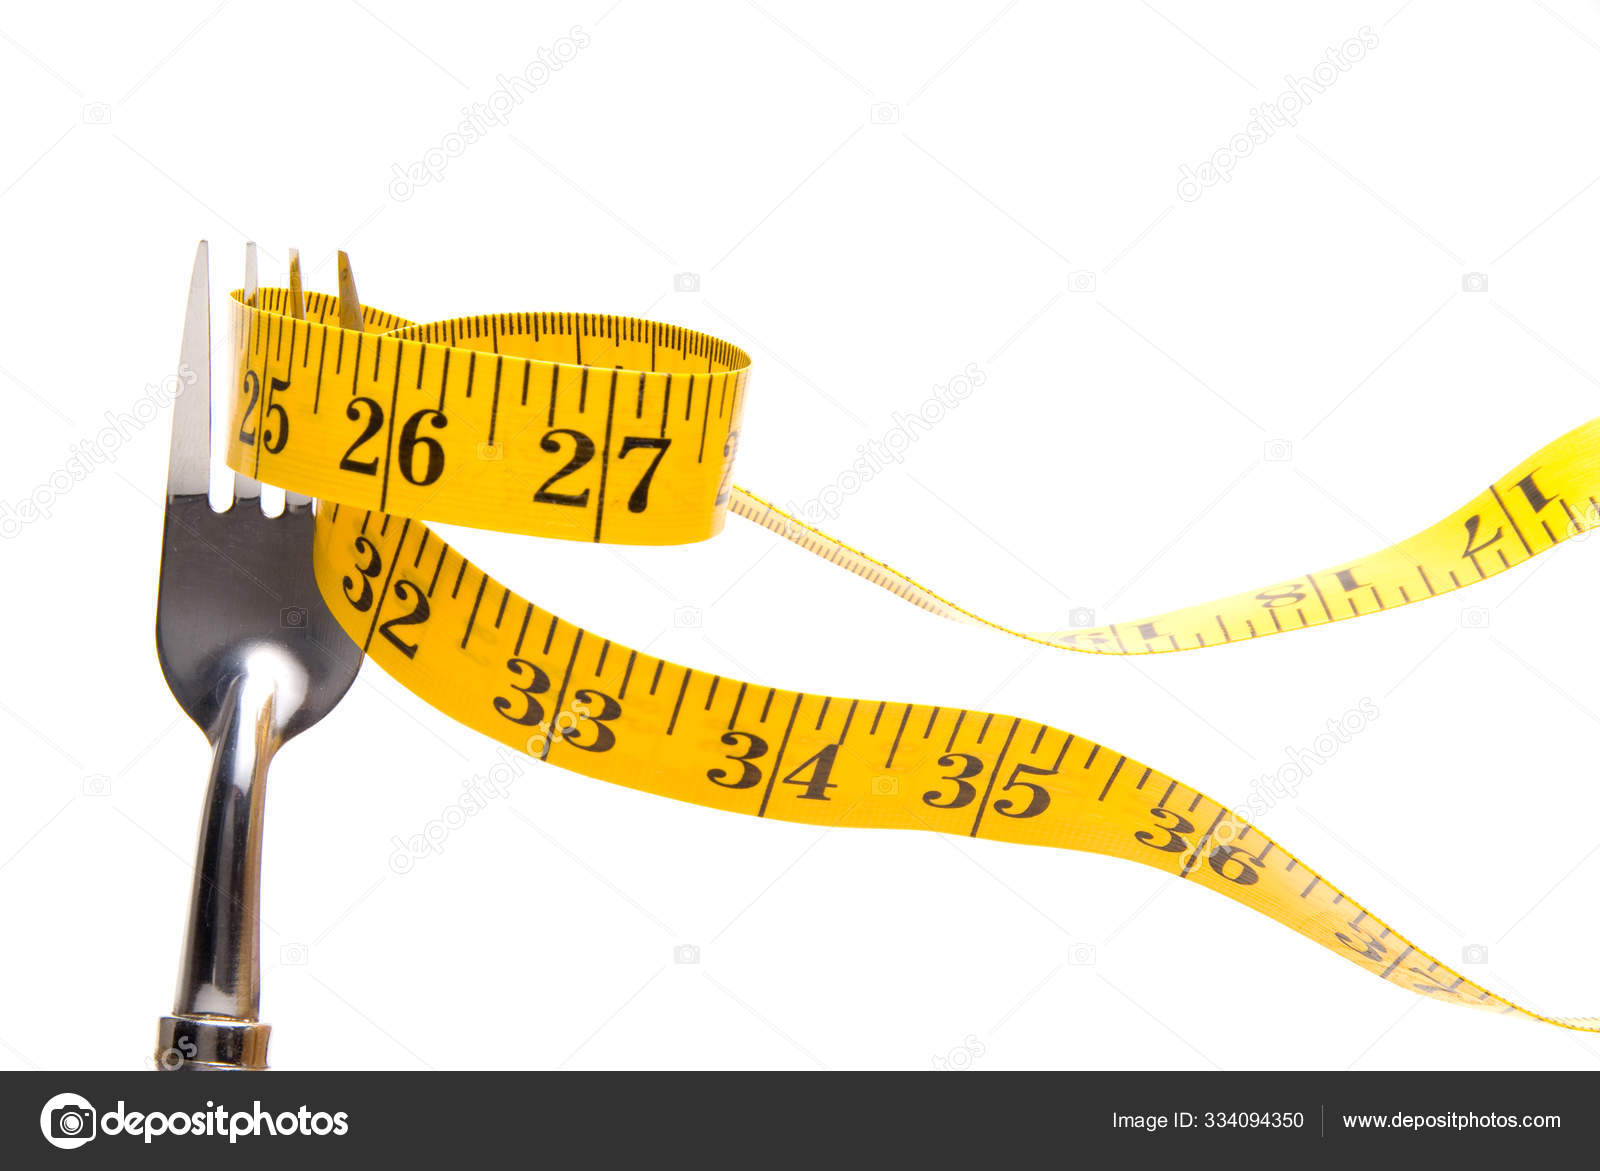 Tailors Tape Fork Stock Photo by ©PantherMediaSeller 334094350